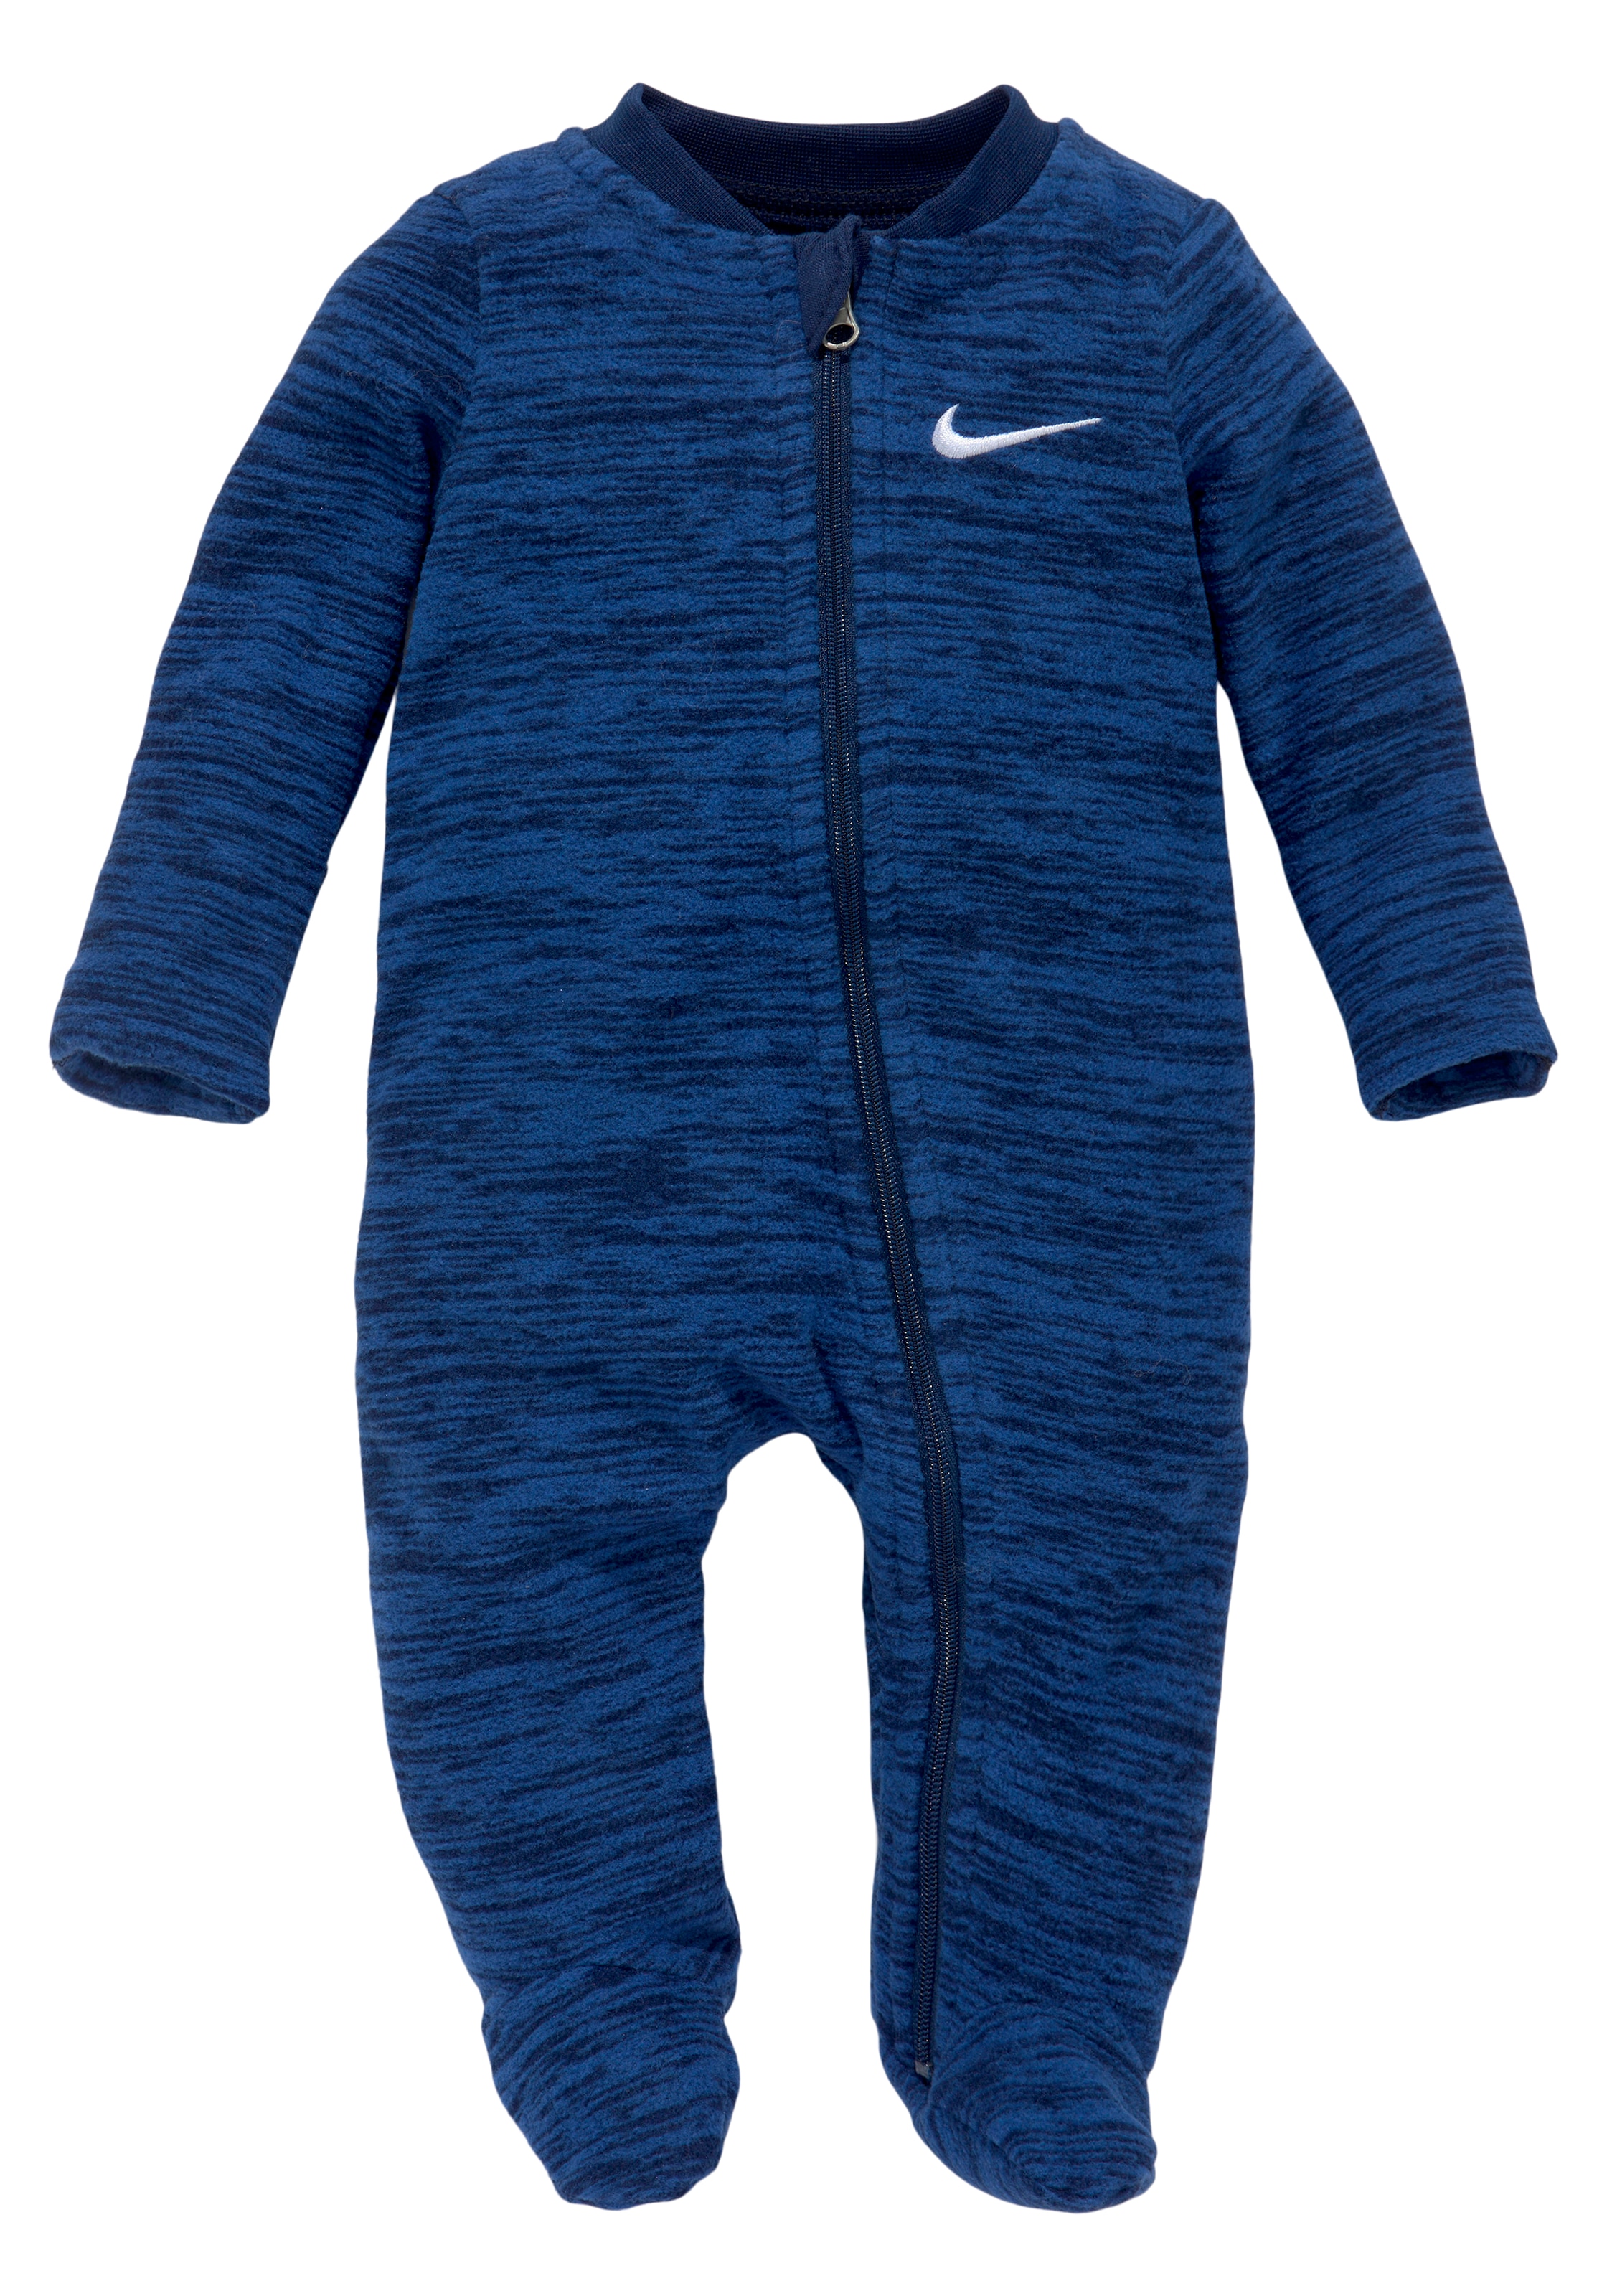 Nike Sportswear Strampler »SPACE DYED FOOTED COVERALL« bei OTTO | Strampler